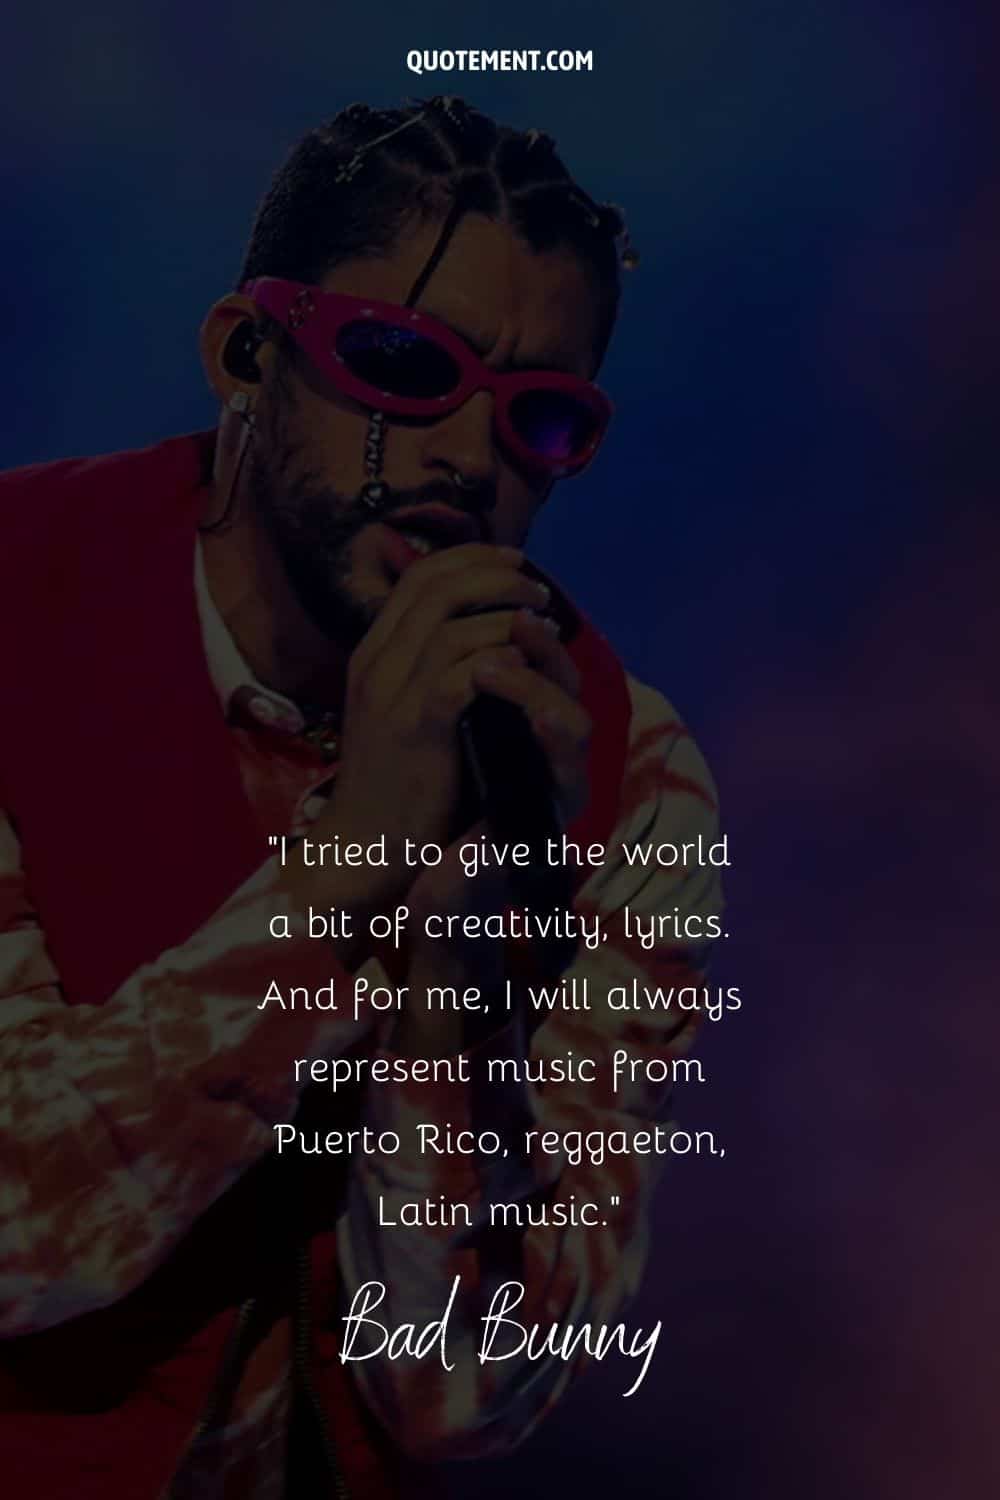 bad bunny holding a microphone